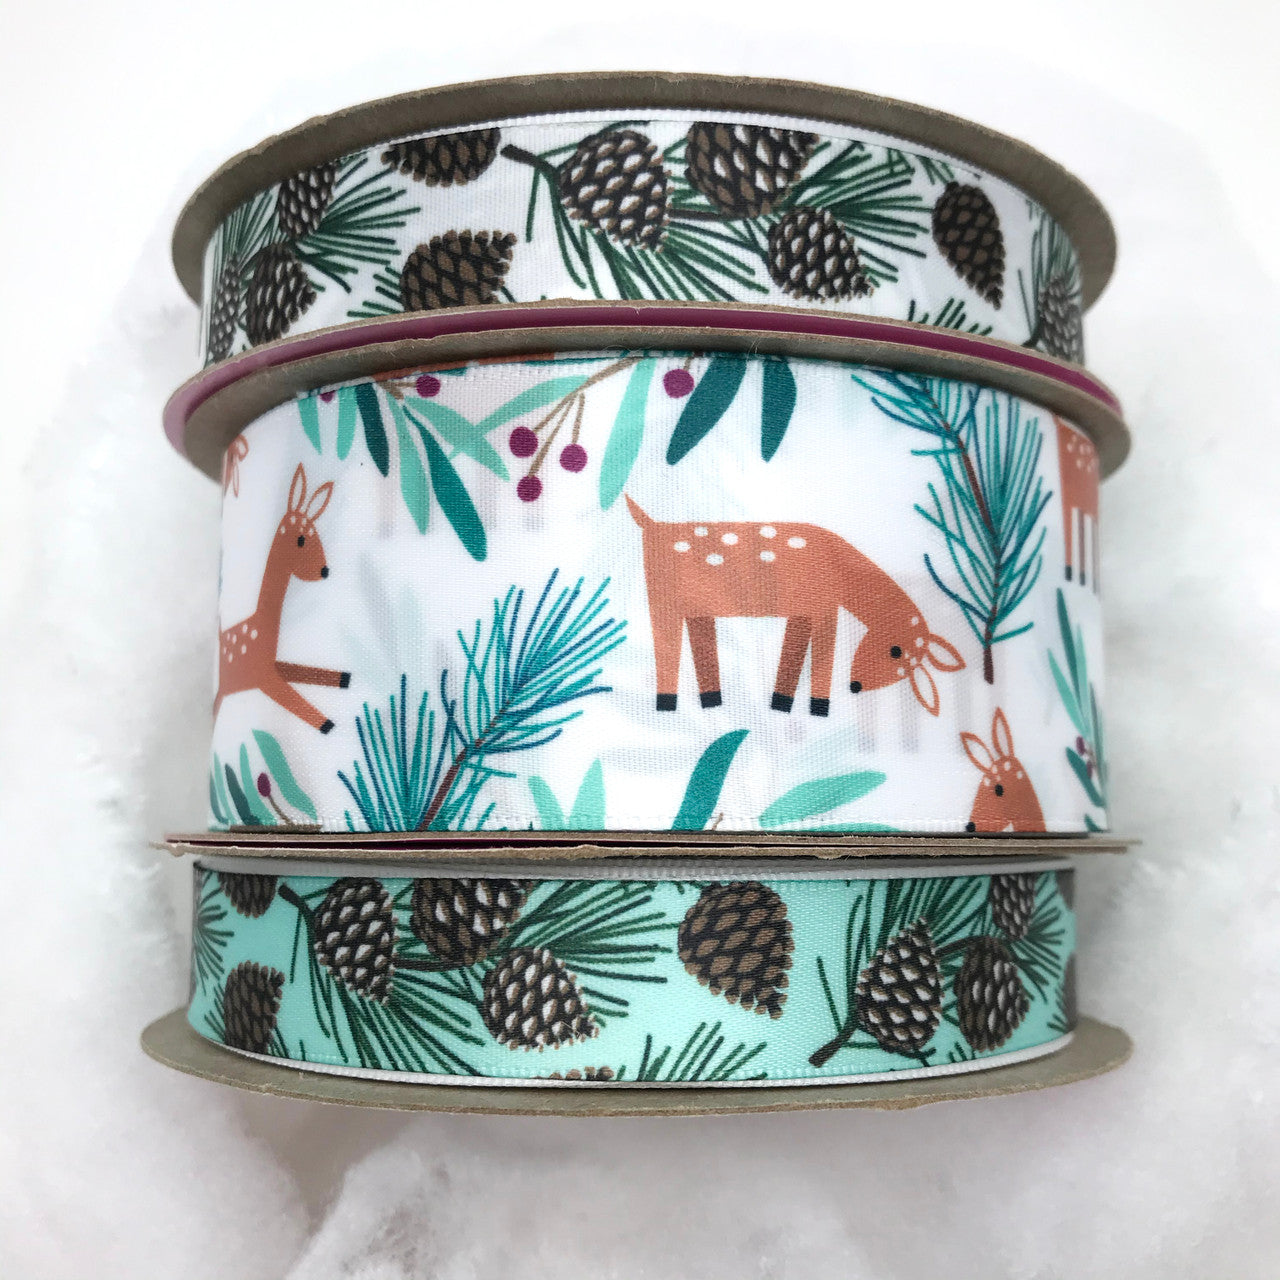 Mix and match our  Winter pine cone themed ribbons with our Woodland Deer for the perfect Winter gift wrap, home decor, floral arrangements and craft projects!